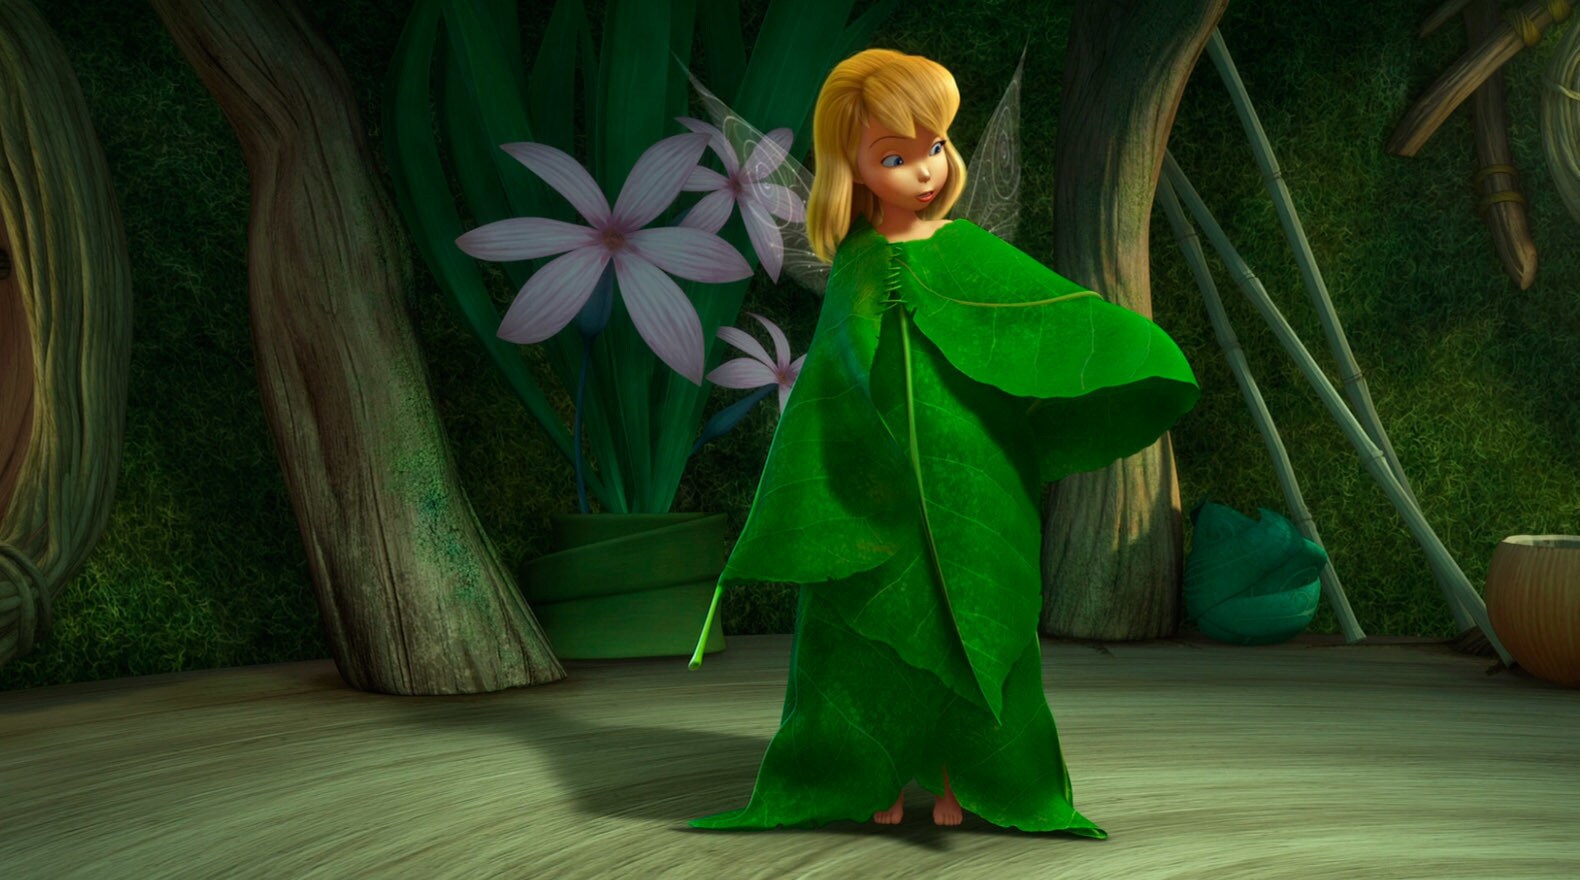 Tinker Bell realizes she needs to put her own spin on things, including her clothes.